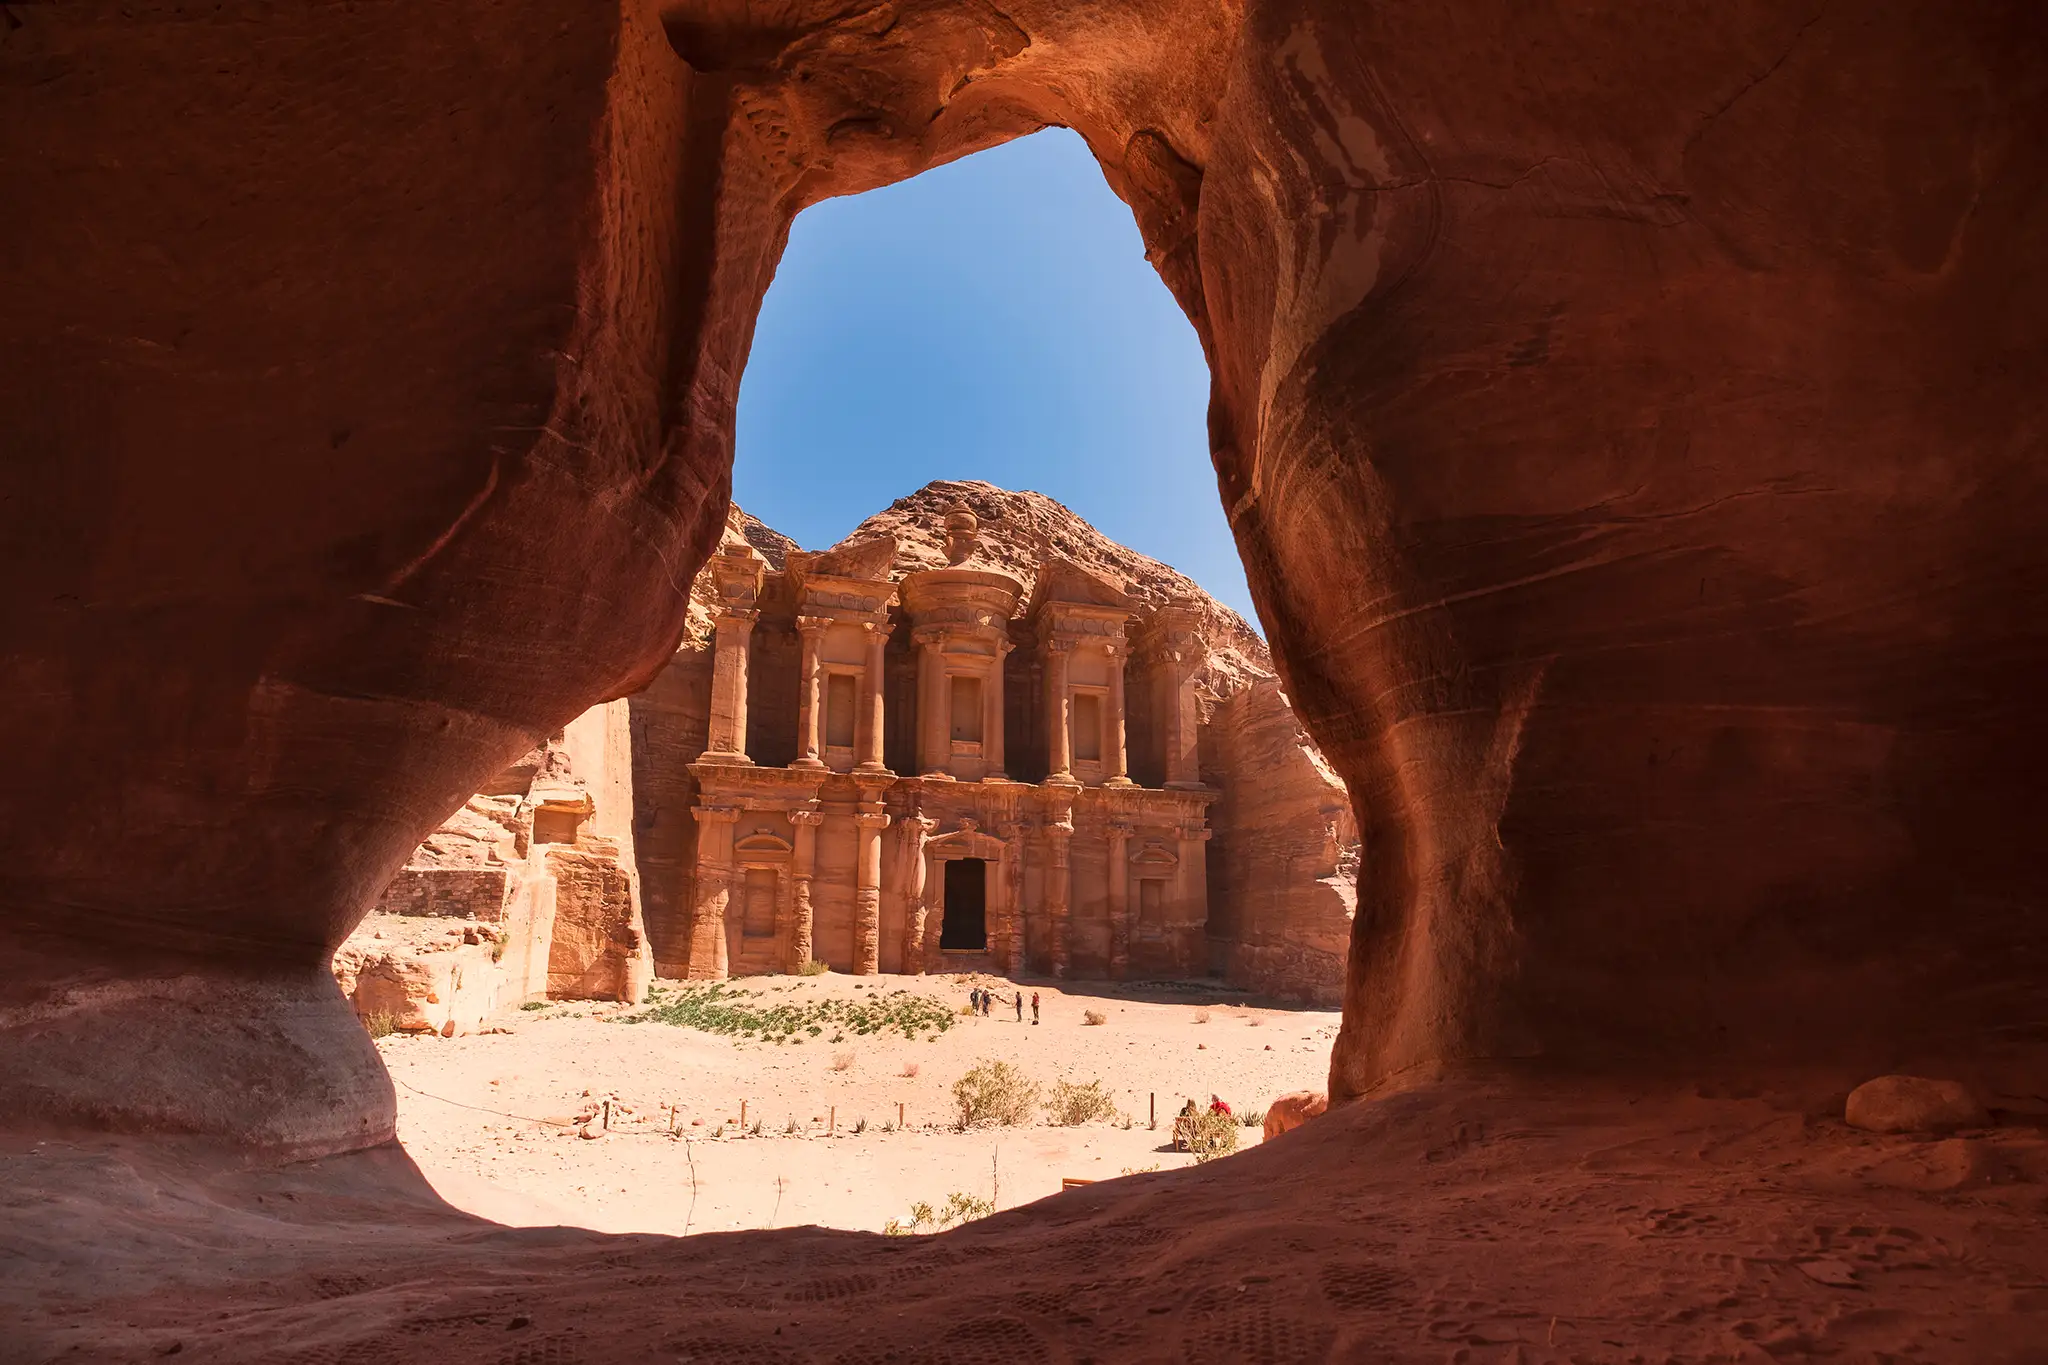 Cave and Ad-Deir in the the ancient city of Petra.